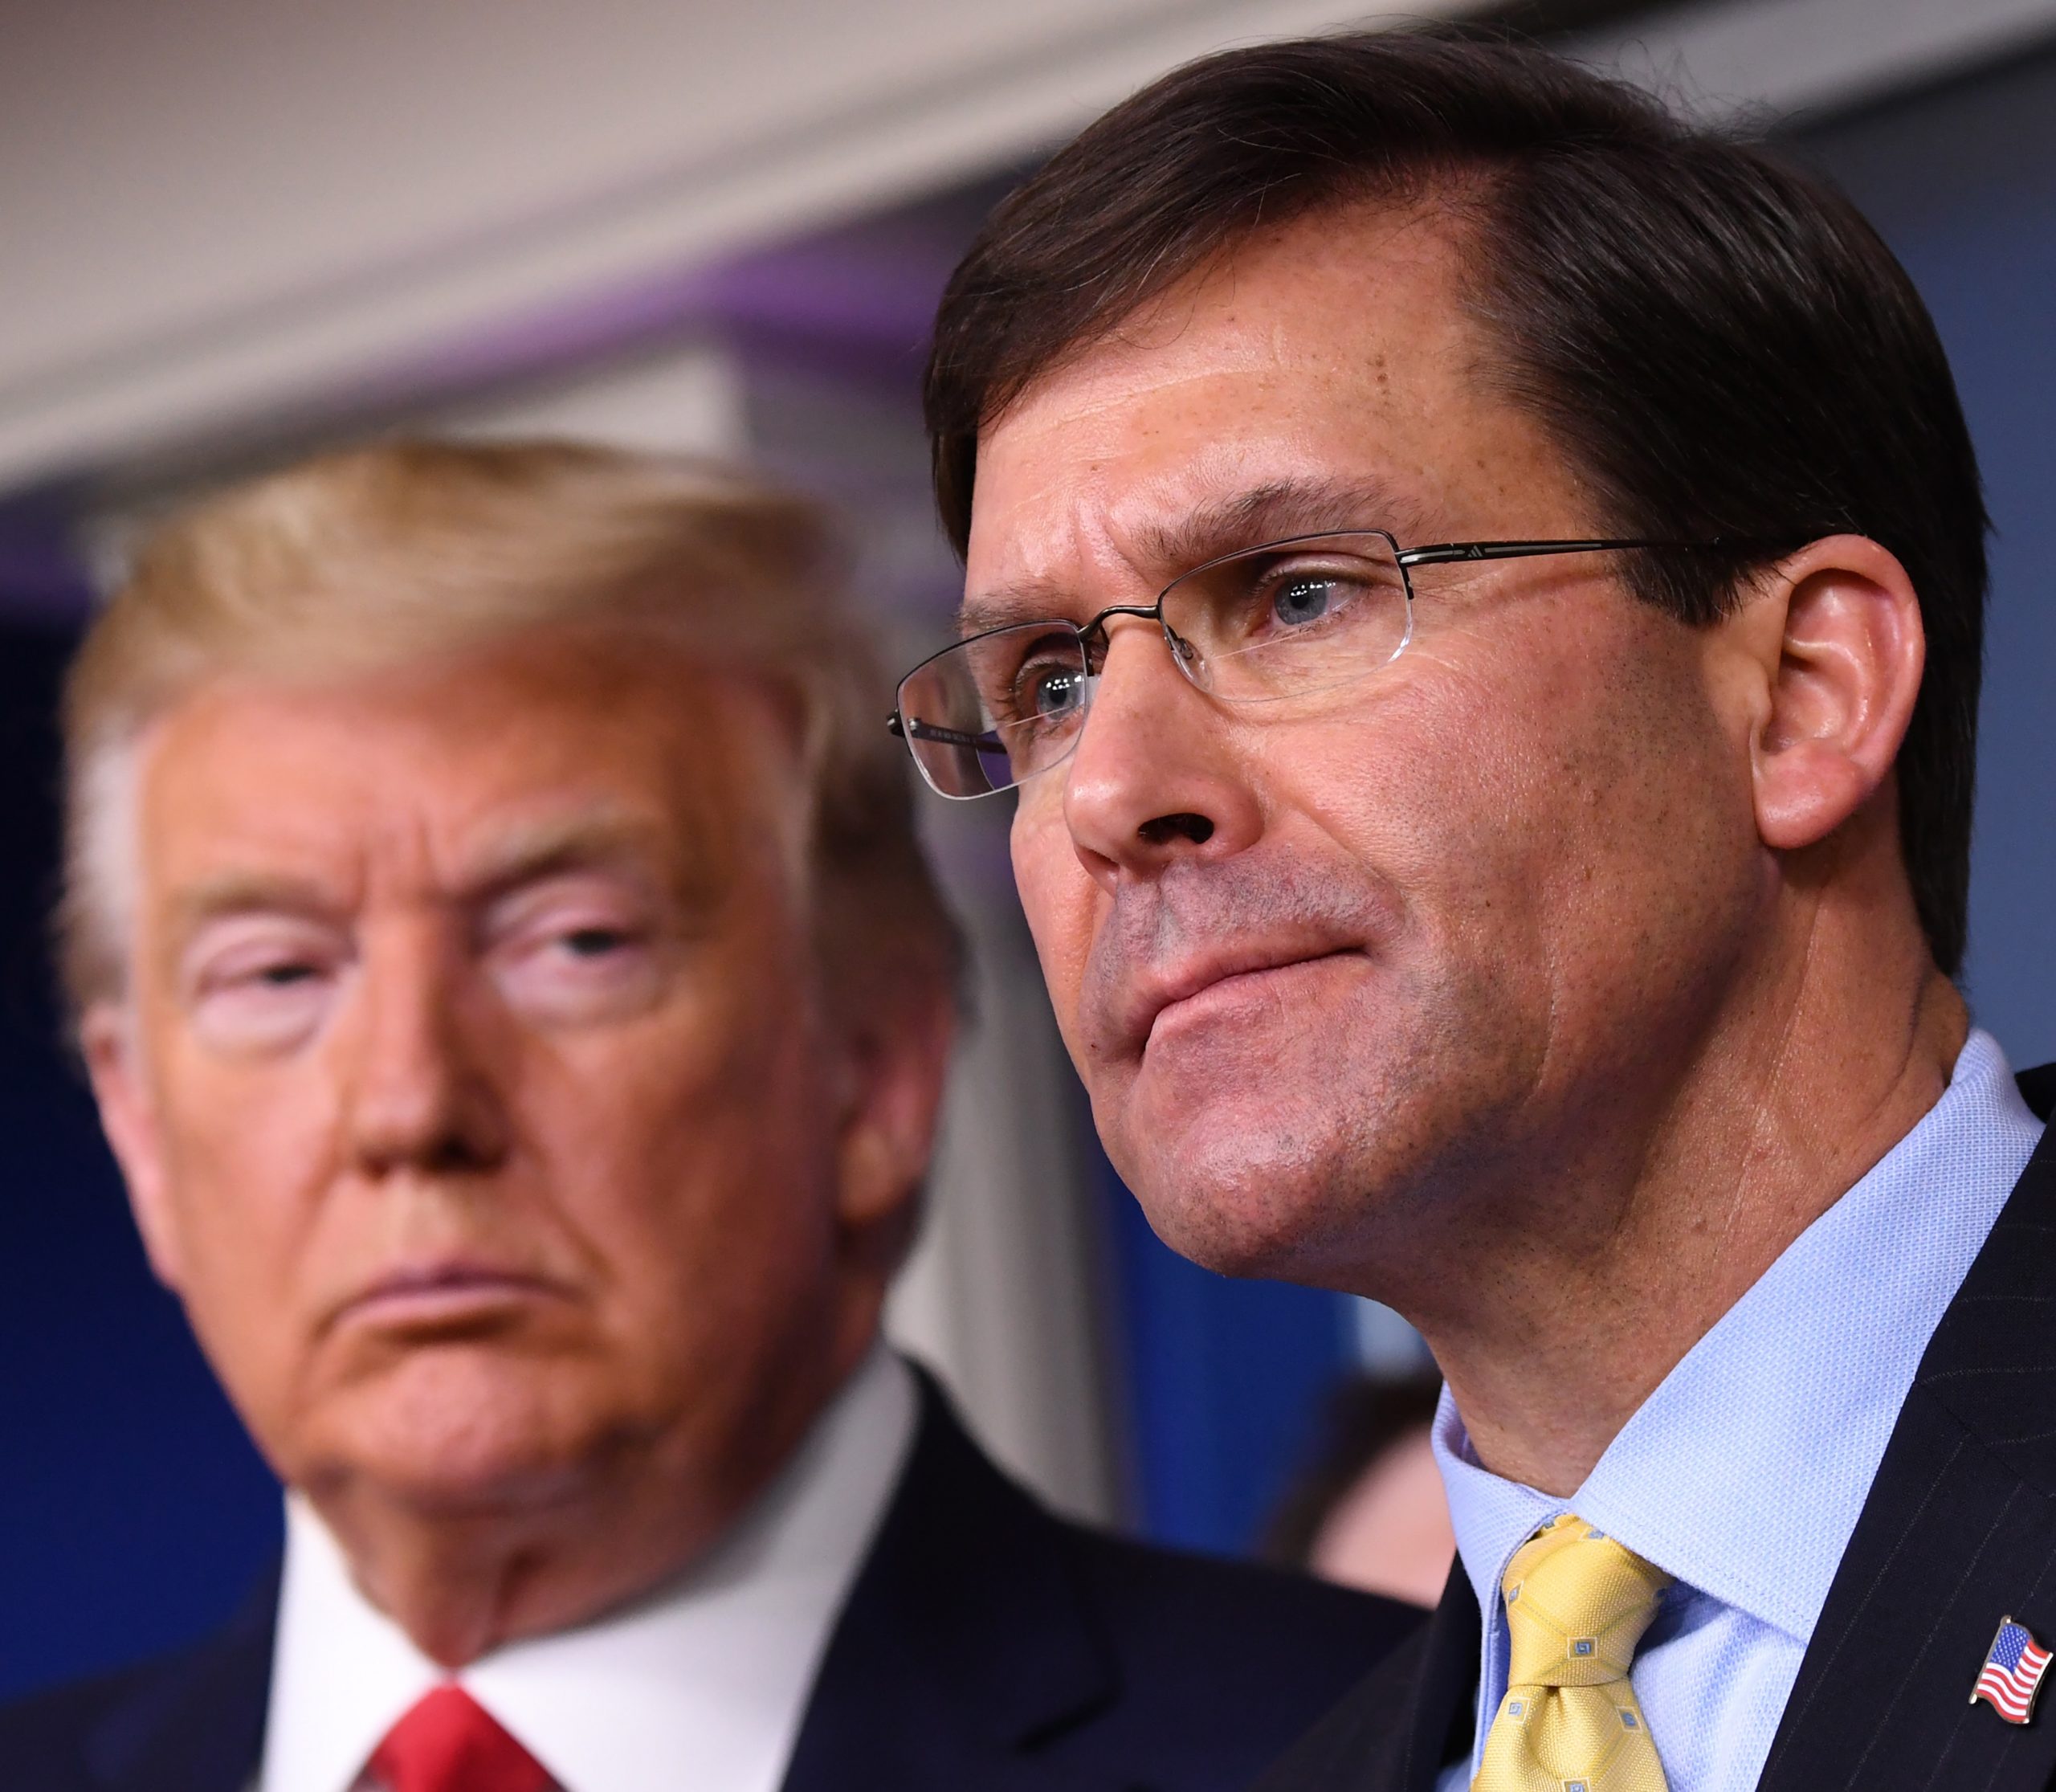 epa08810258 (FILE) - Secretary of Defense Mark Esper (R) delivers remarks on the COVID-19 (Coronavirus) pandemic as US President Donald J. Trump looks on in the Brady Press Briefing Room at the White House in Washington, DC, USA, 18 March 2020 (Reissued 09 November 2020). US President Donald Trump on 09 November 2020 said on Twitter he has fired Secretary of Defence Mark Esper while Christopher Miller was nominated by Trump as new secretary of defence.  EPA/KEVIN DIETSCH / POOL *** Local Caption *** 56128905